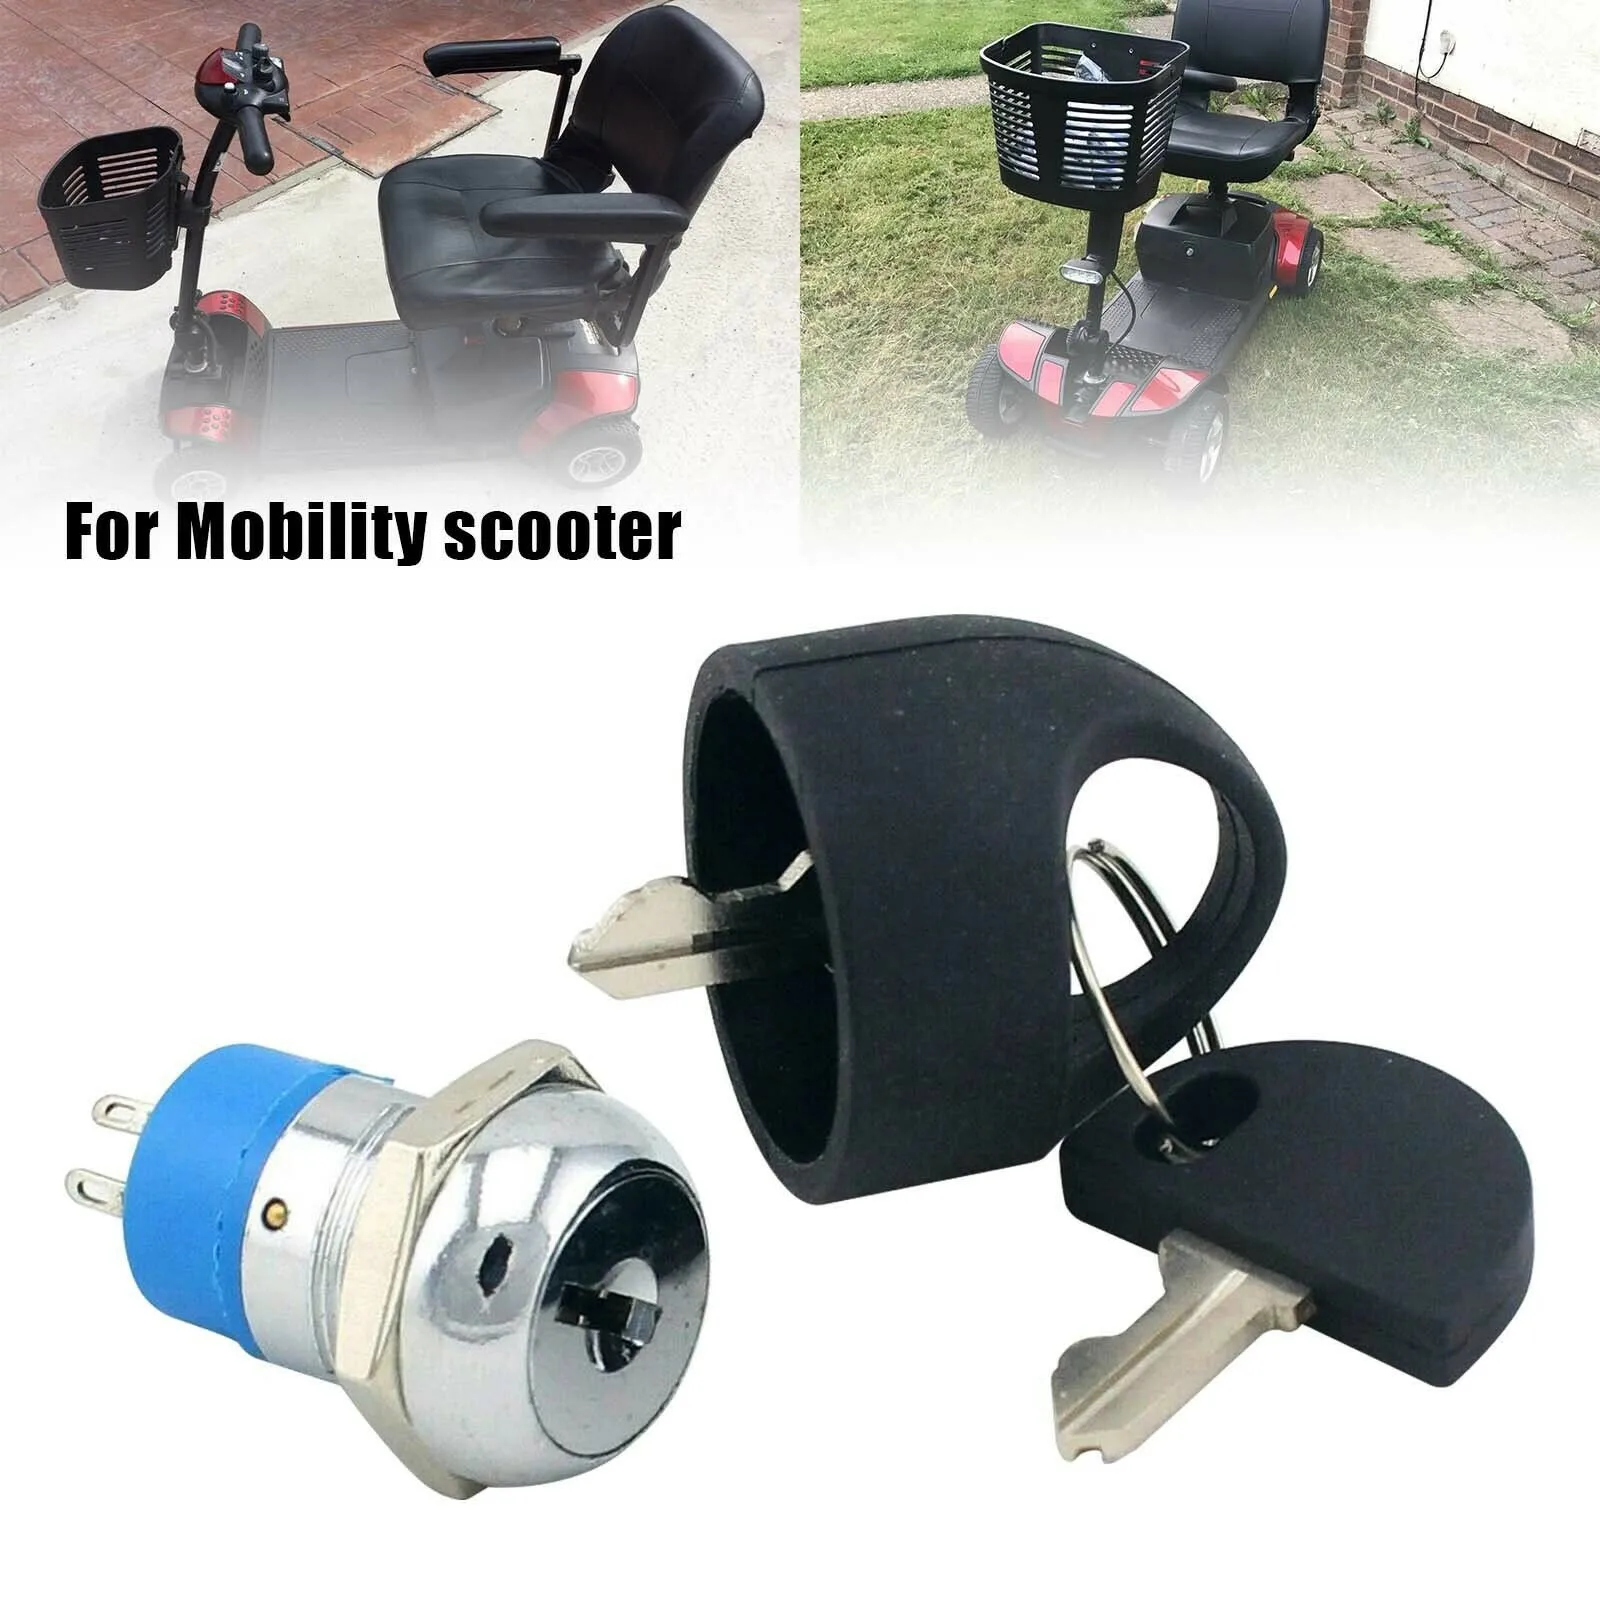 

Keys Ignition Switch Lock Blade Structure Equipment Lock Core M19*L 22MM Open Scooters Zinc Alloy Lock Shell Brand New